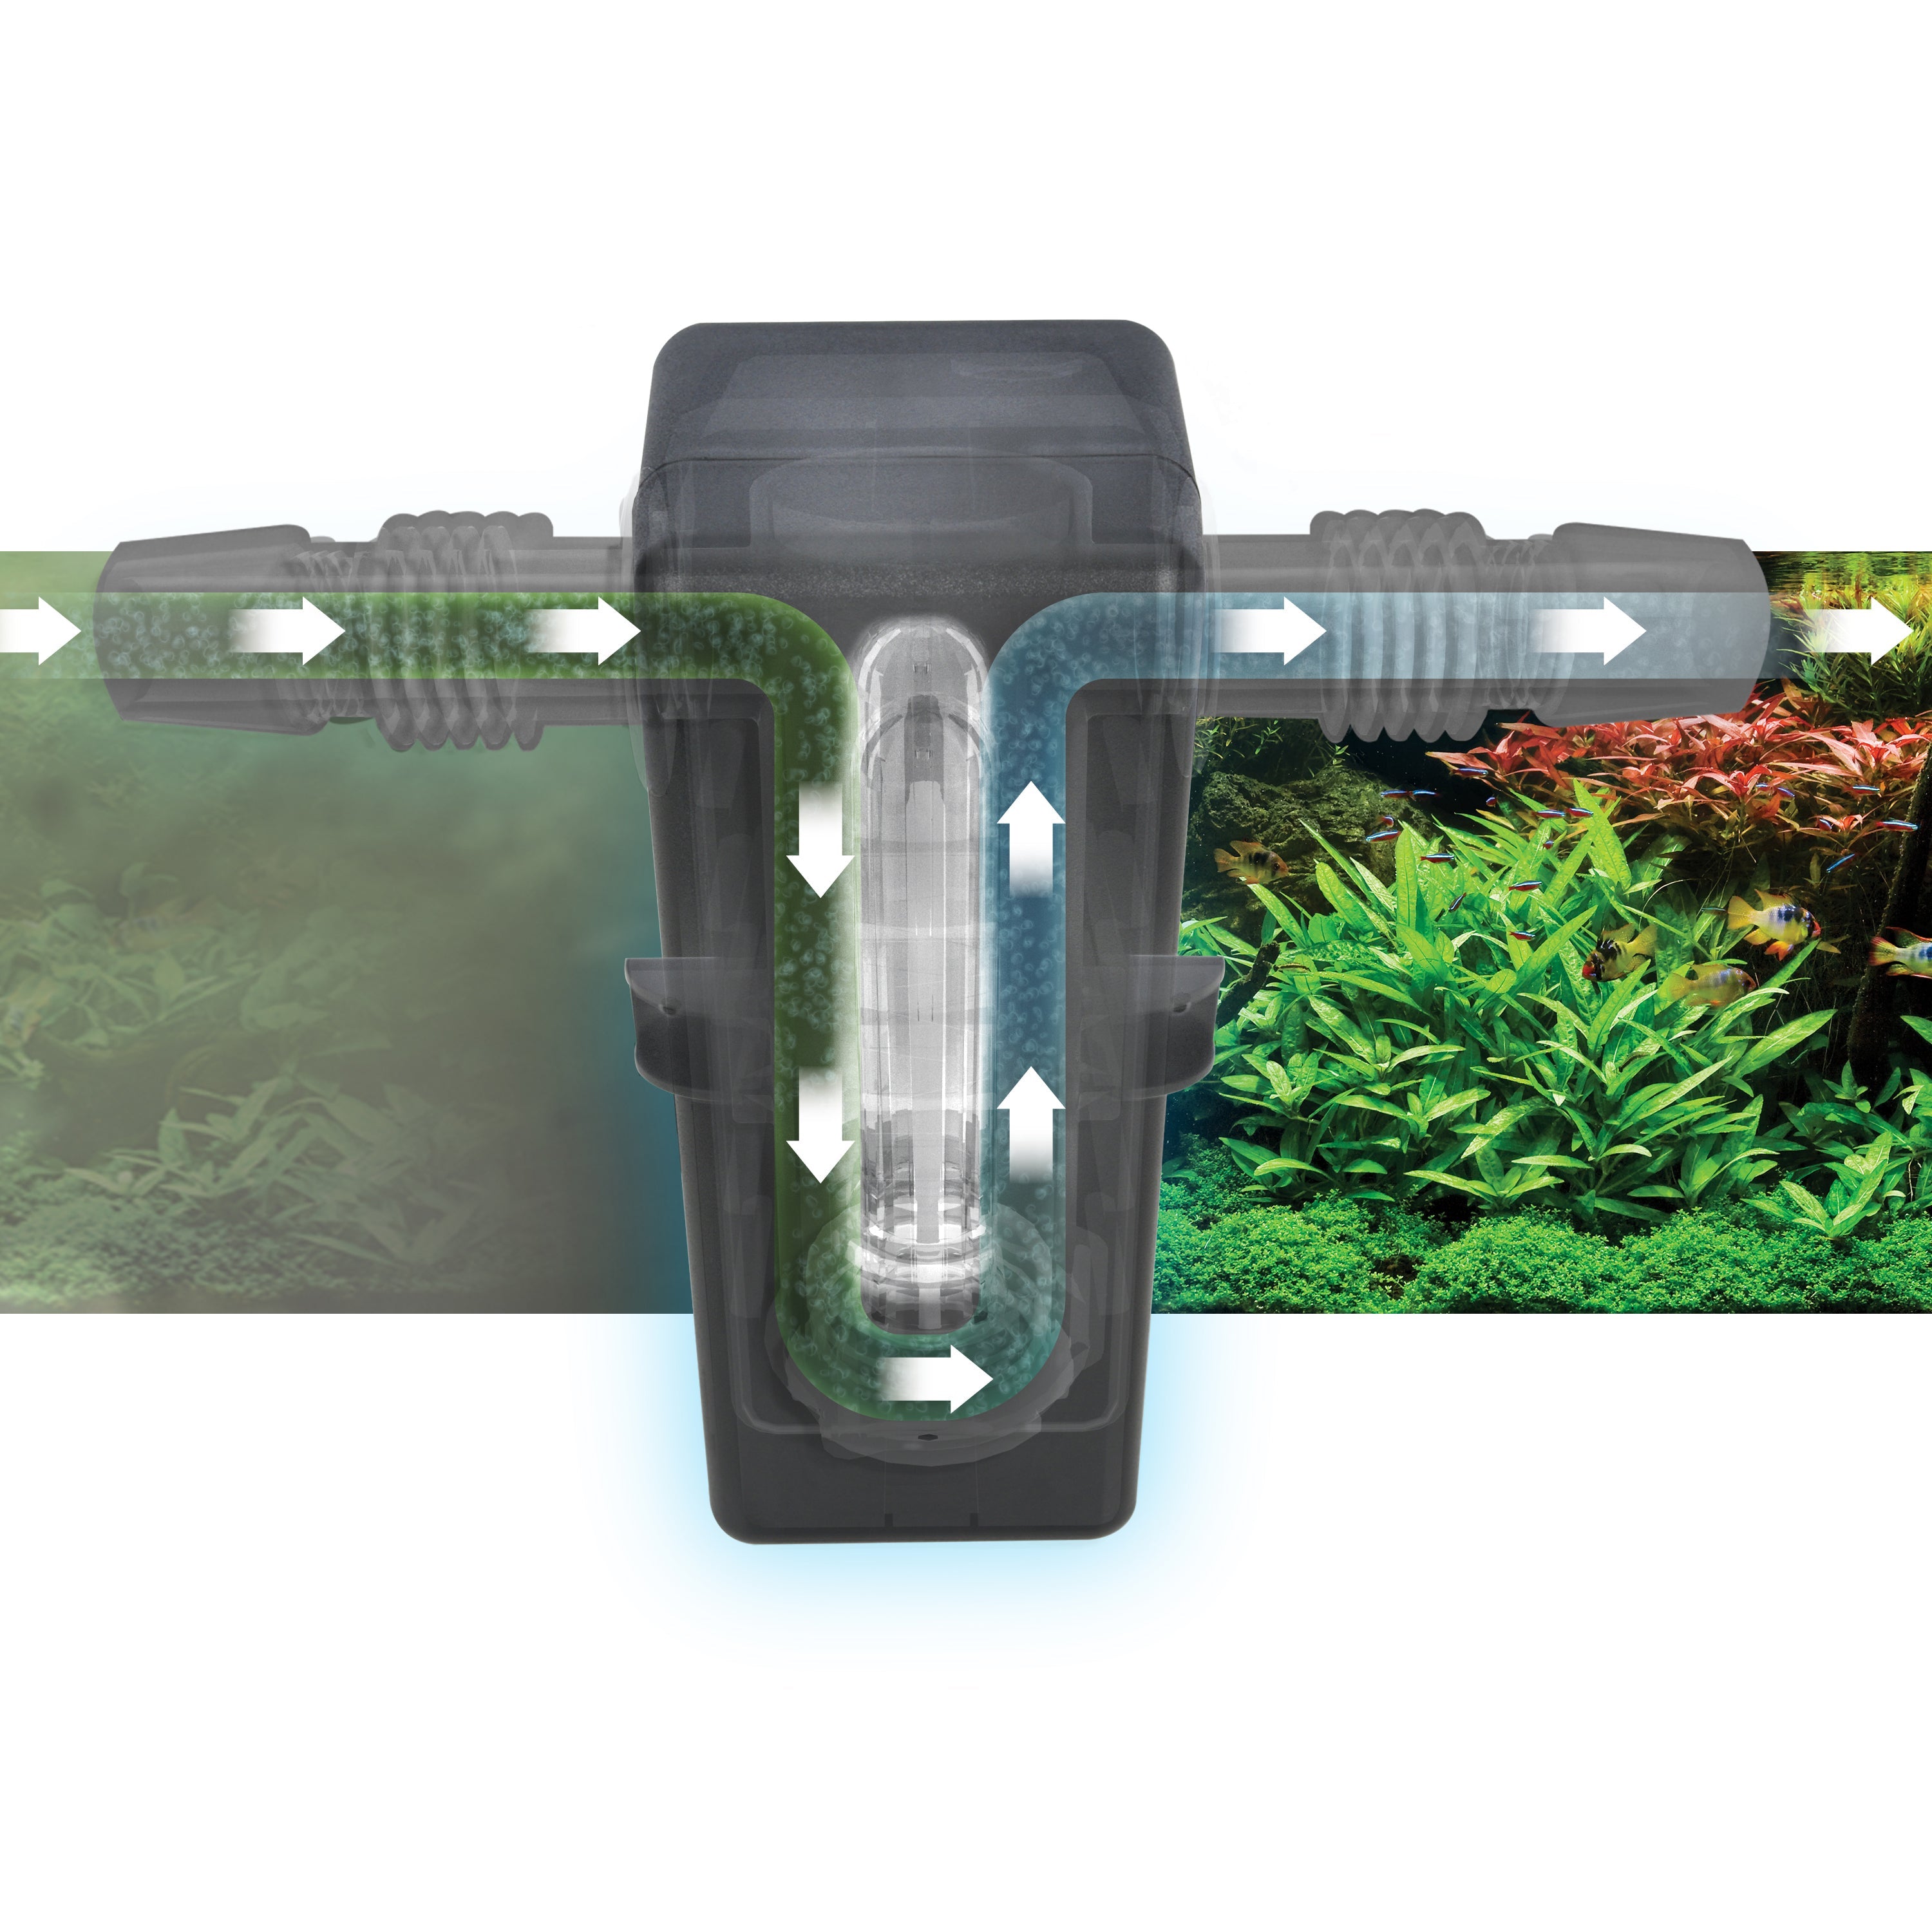 Fluval UVC In-Line Clarifier - up to 100 US Gal (400 L)